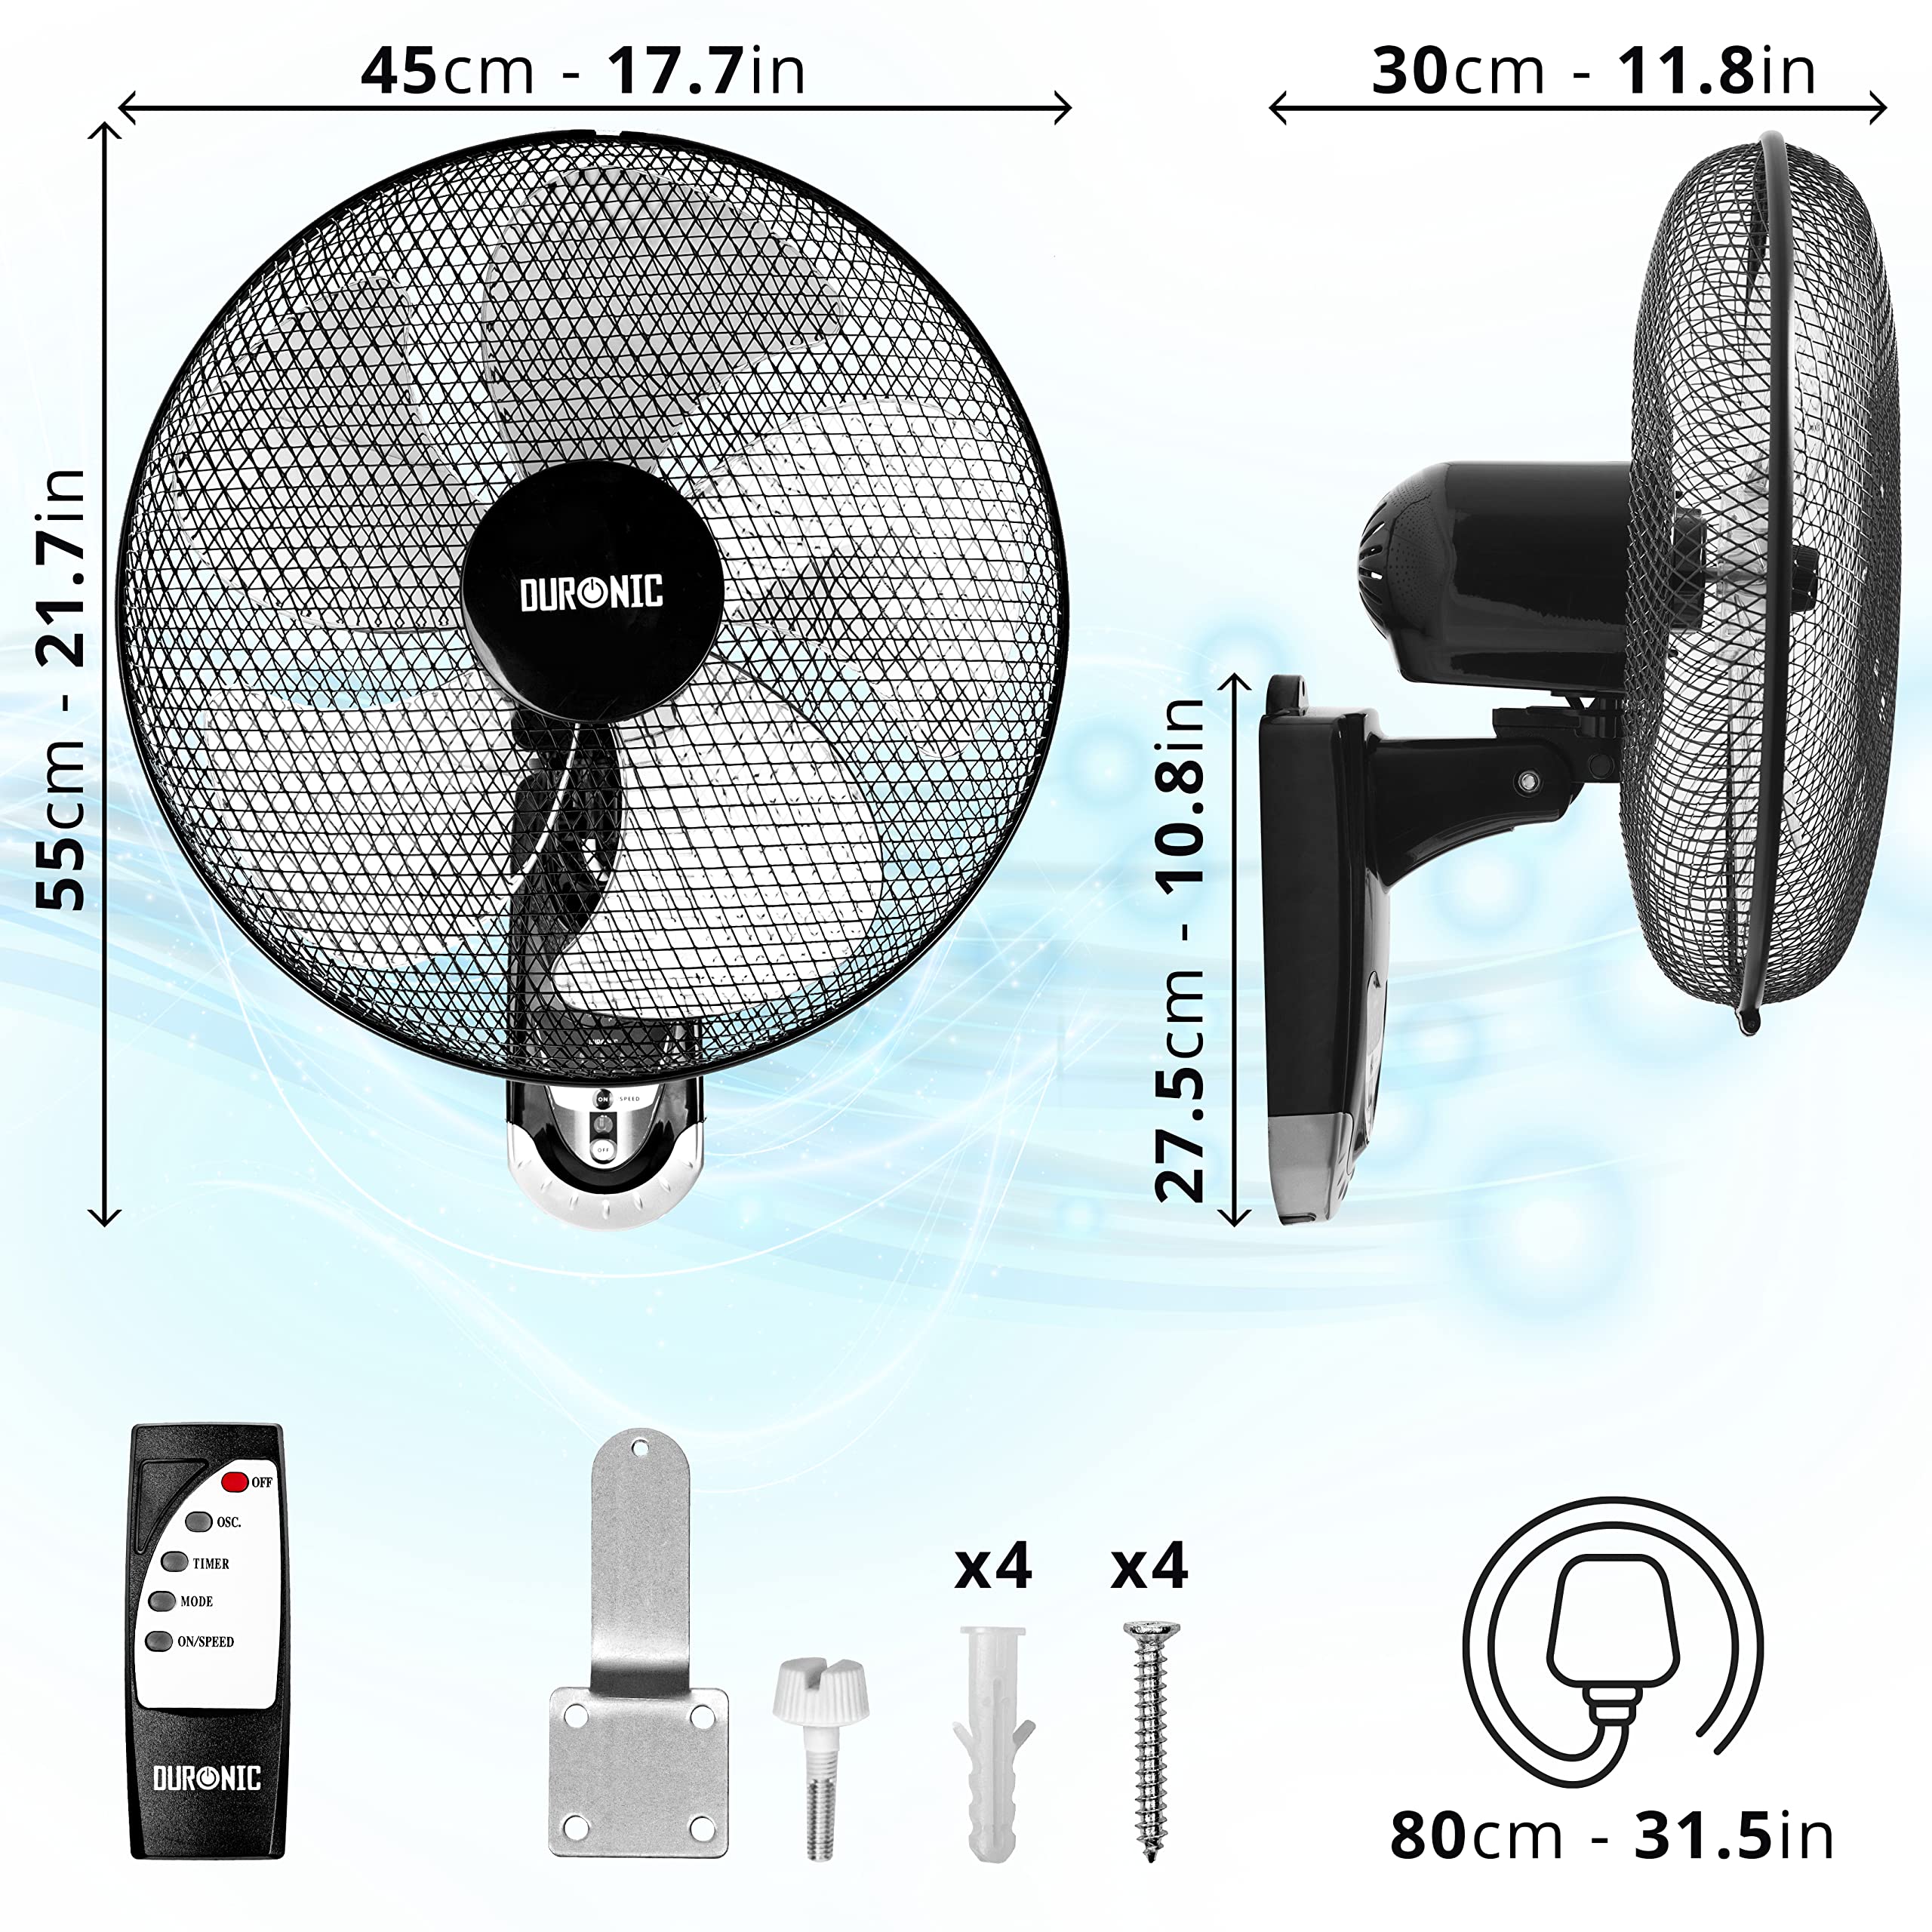 Duronic Wall Fan FN55 Wall Mounted Fan with Remote Control, 16 Inch Fan, 3 Speeds, Timer, Black Fan with 5 Blades for Ultimate Air Cooling